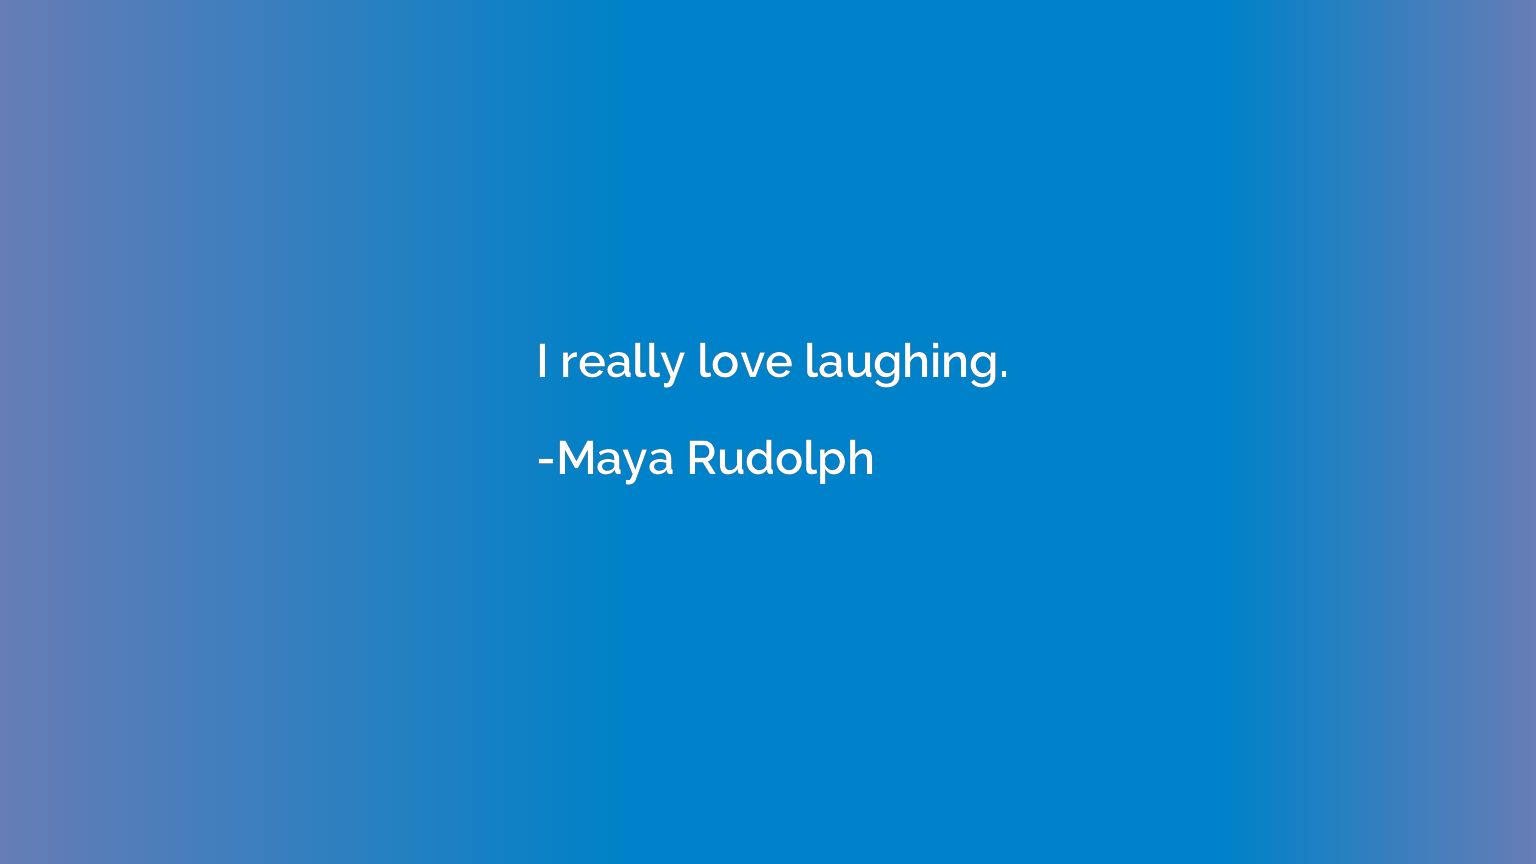 I really love laughing.